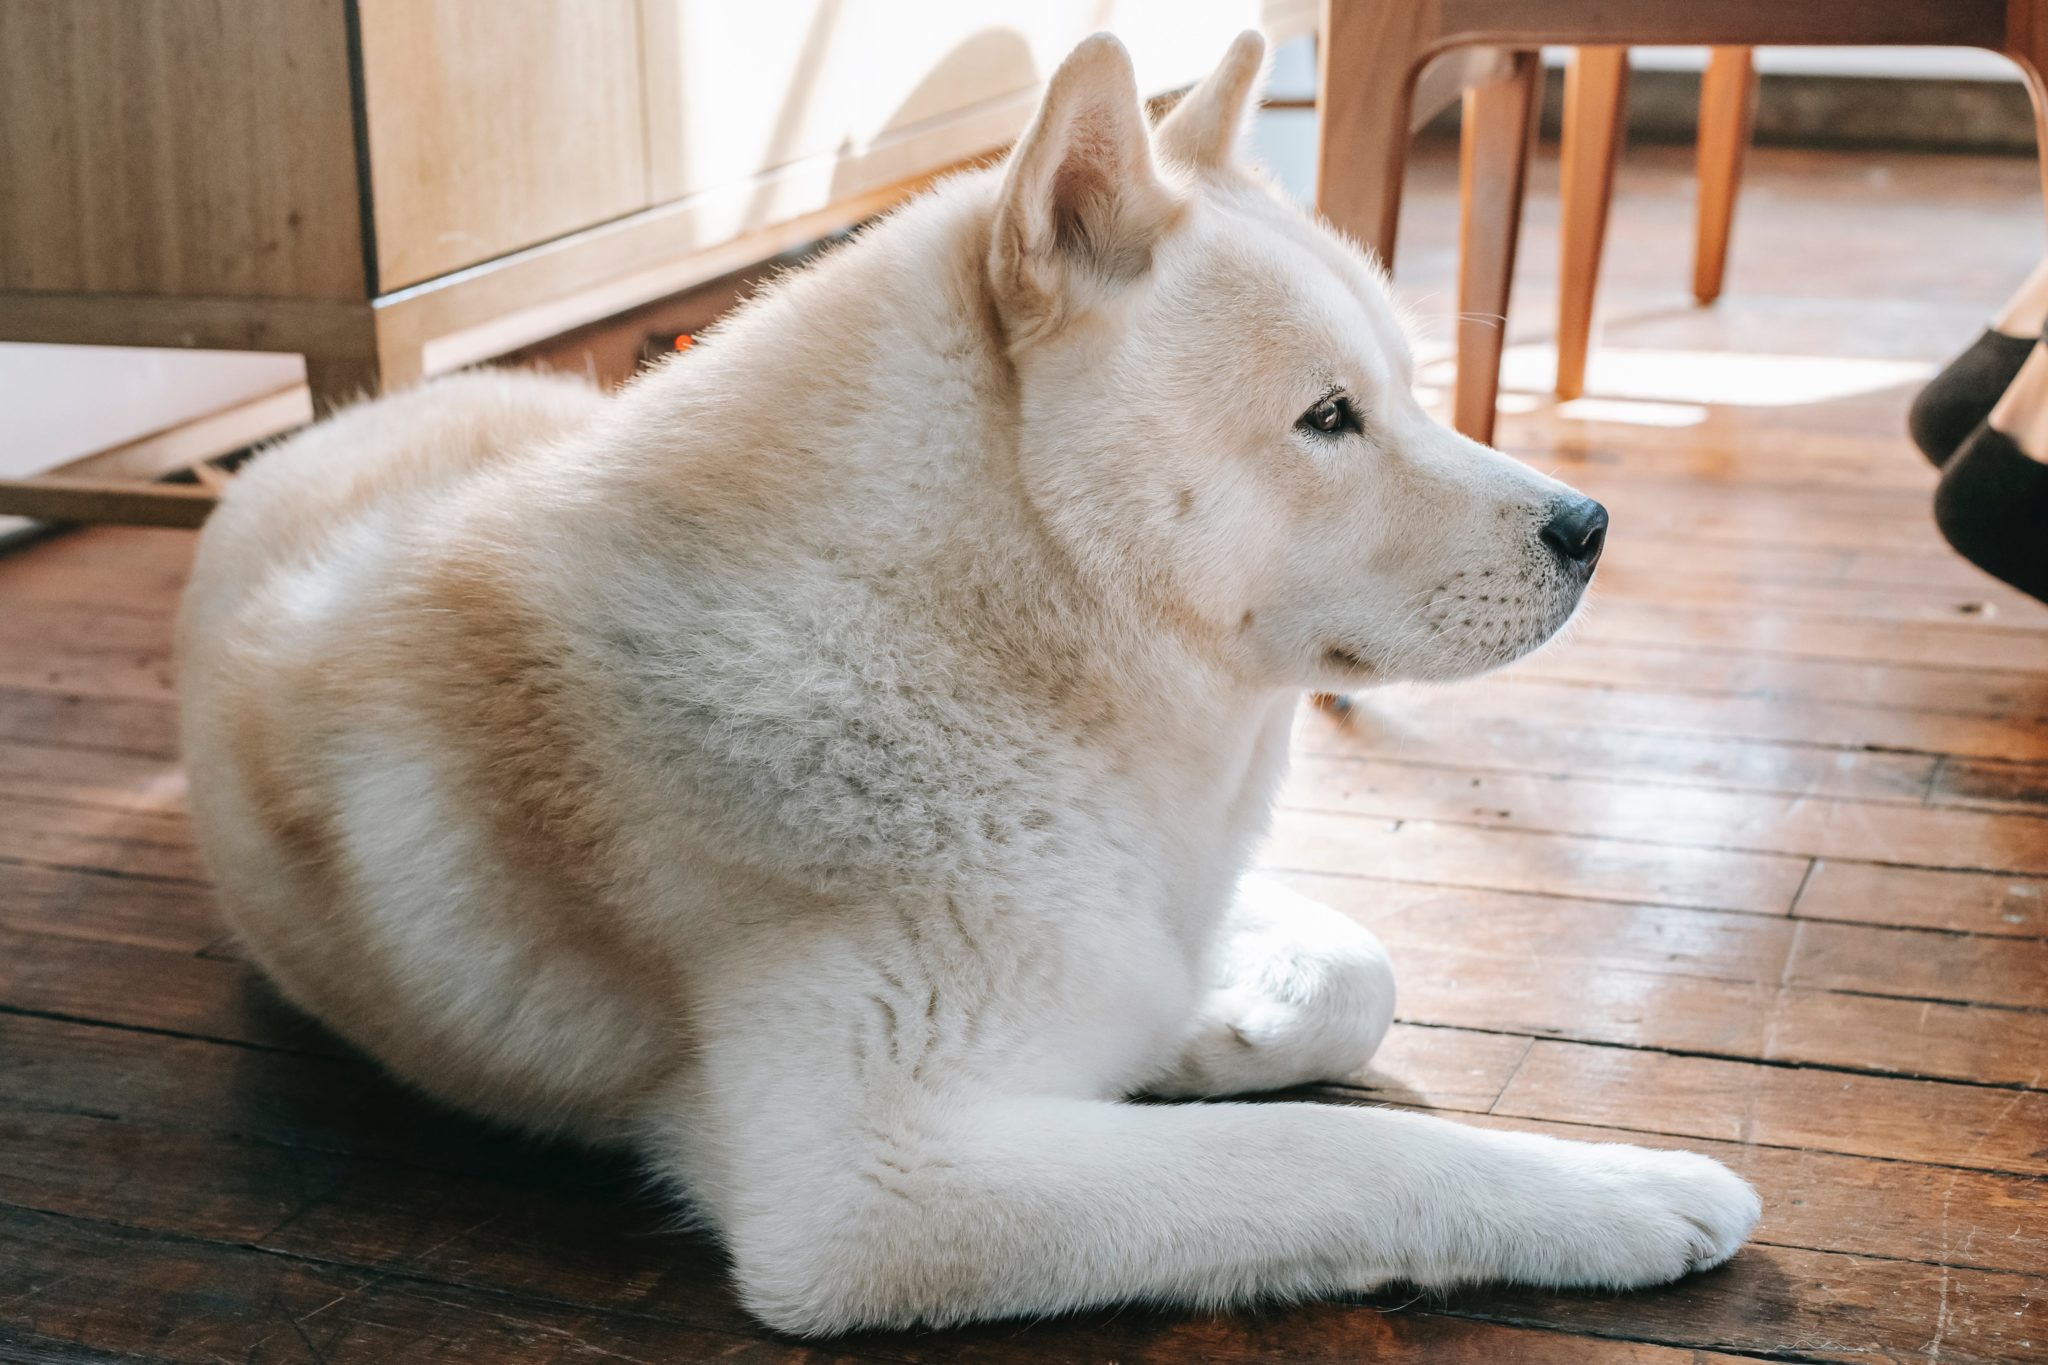 An Akita is a breed of working dog that originated in the mountains of northern Japan